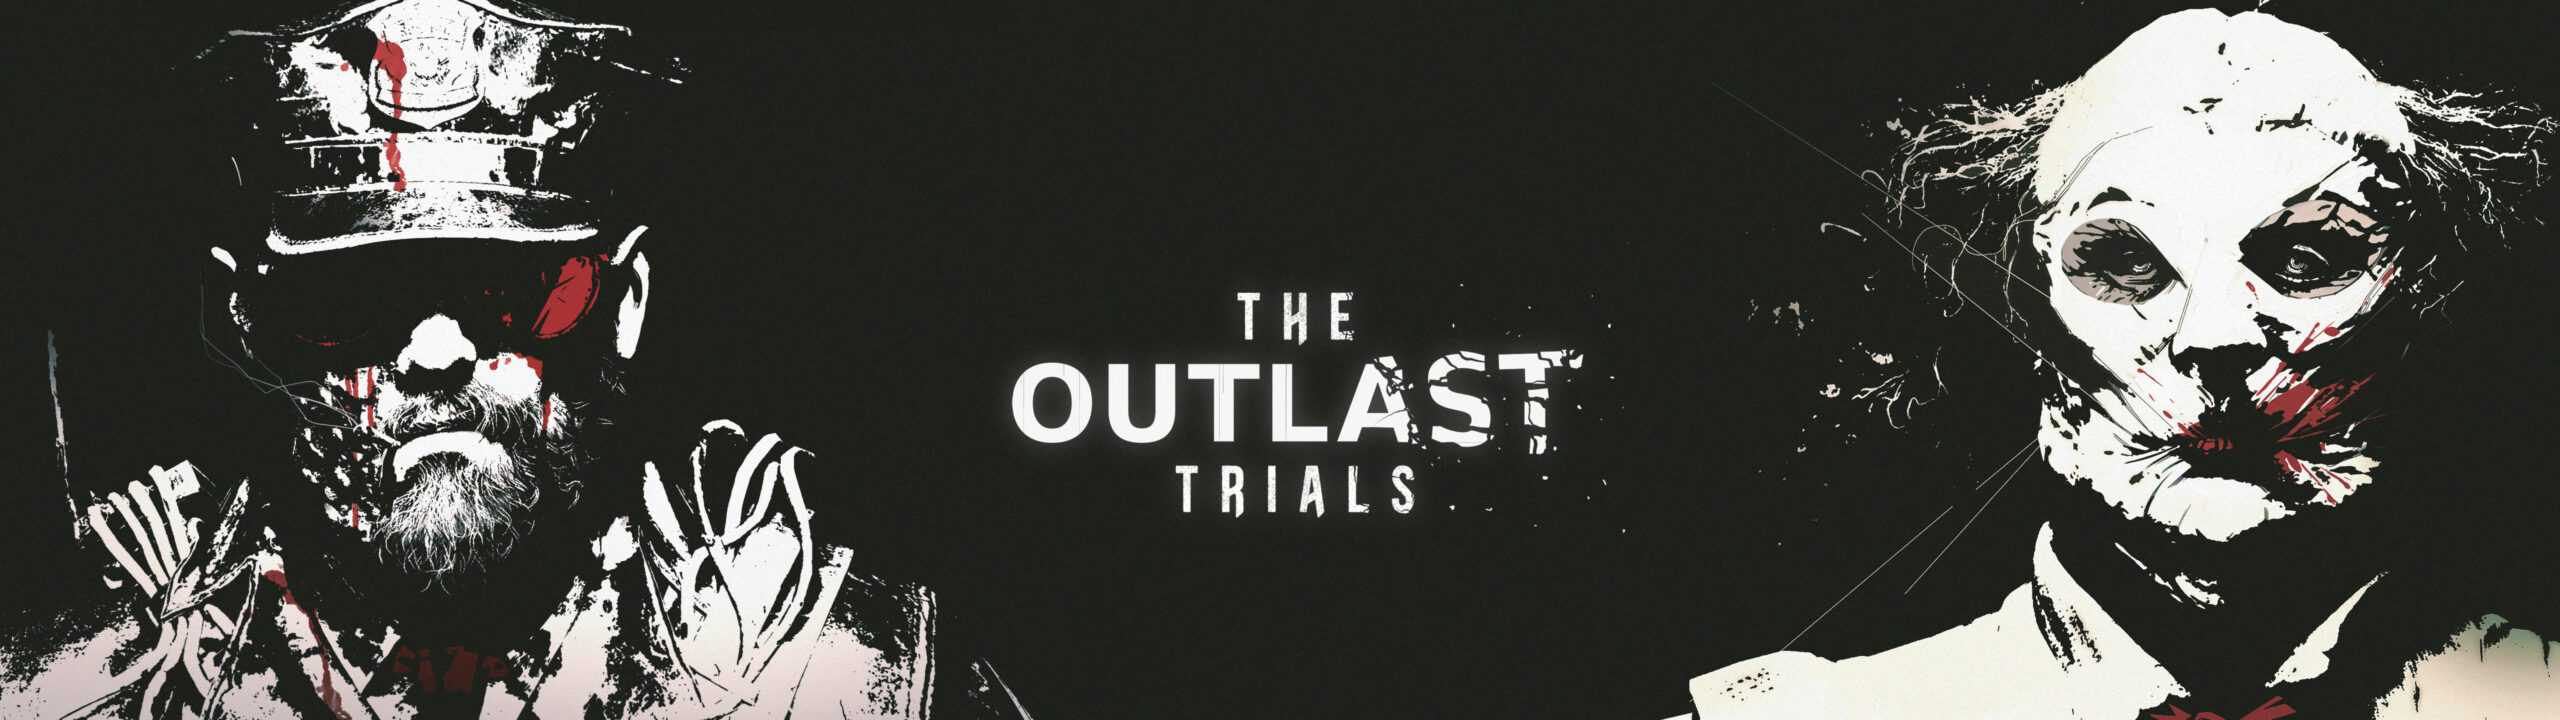 The Outlast Trials to Feature PC/Console Crossplay – Chit Hot